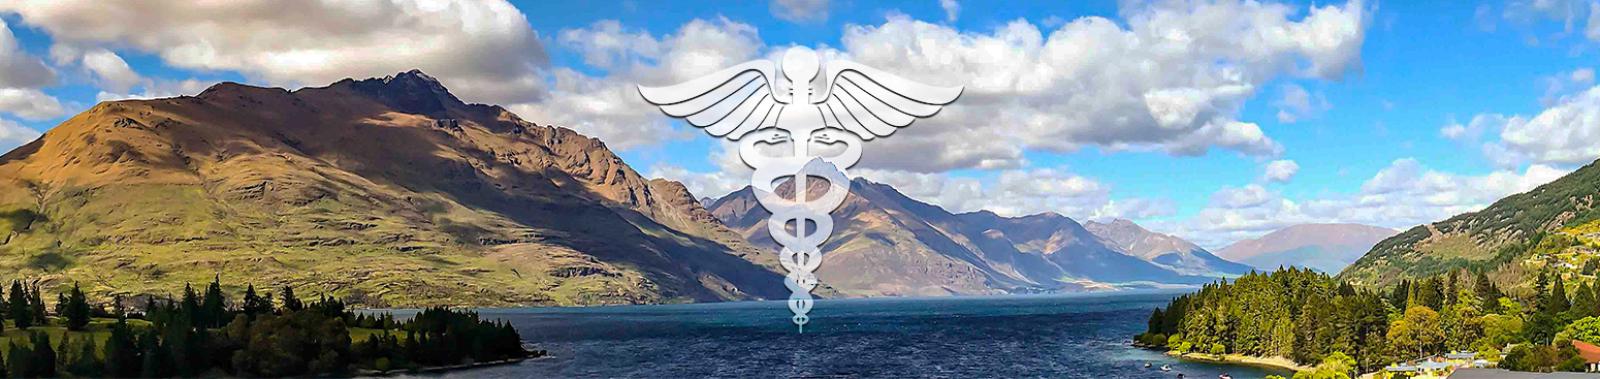 Accident and Doctors international symbol sitting over beautiful photo of NZ